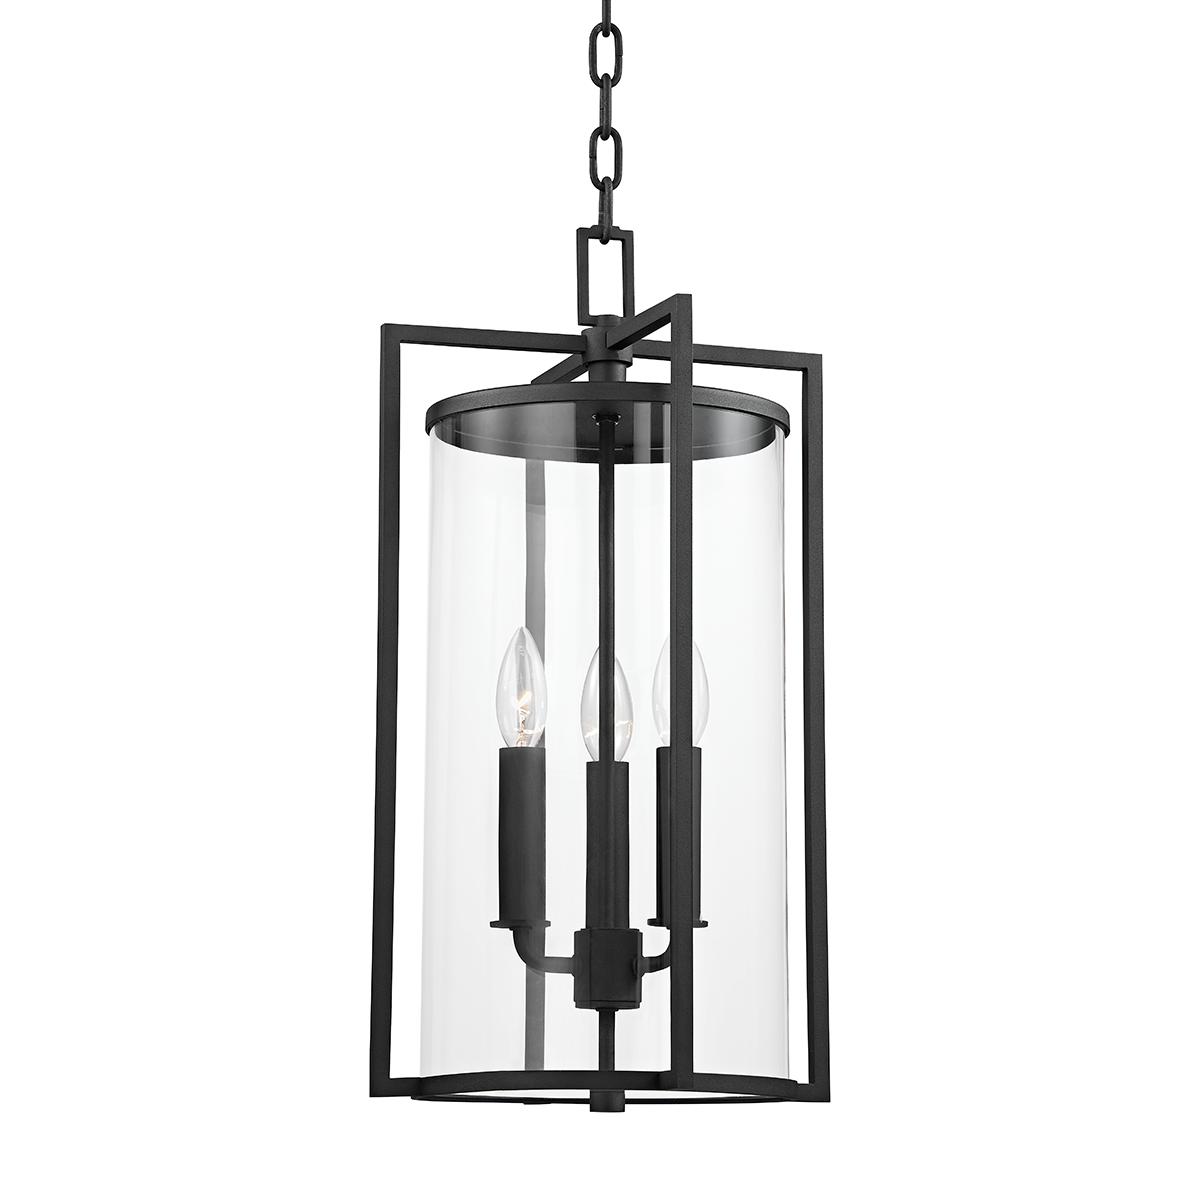 Troy PERCY 3 LIGHT EXTERIOR LANTERN F1146 Outdoor l Wall Troy Lighting TEXTURE BLACK  